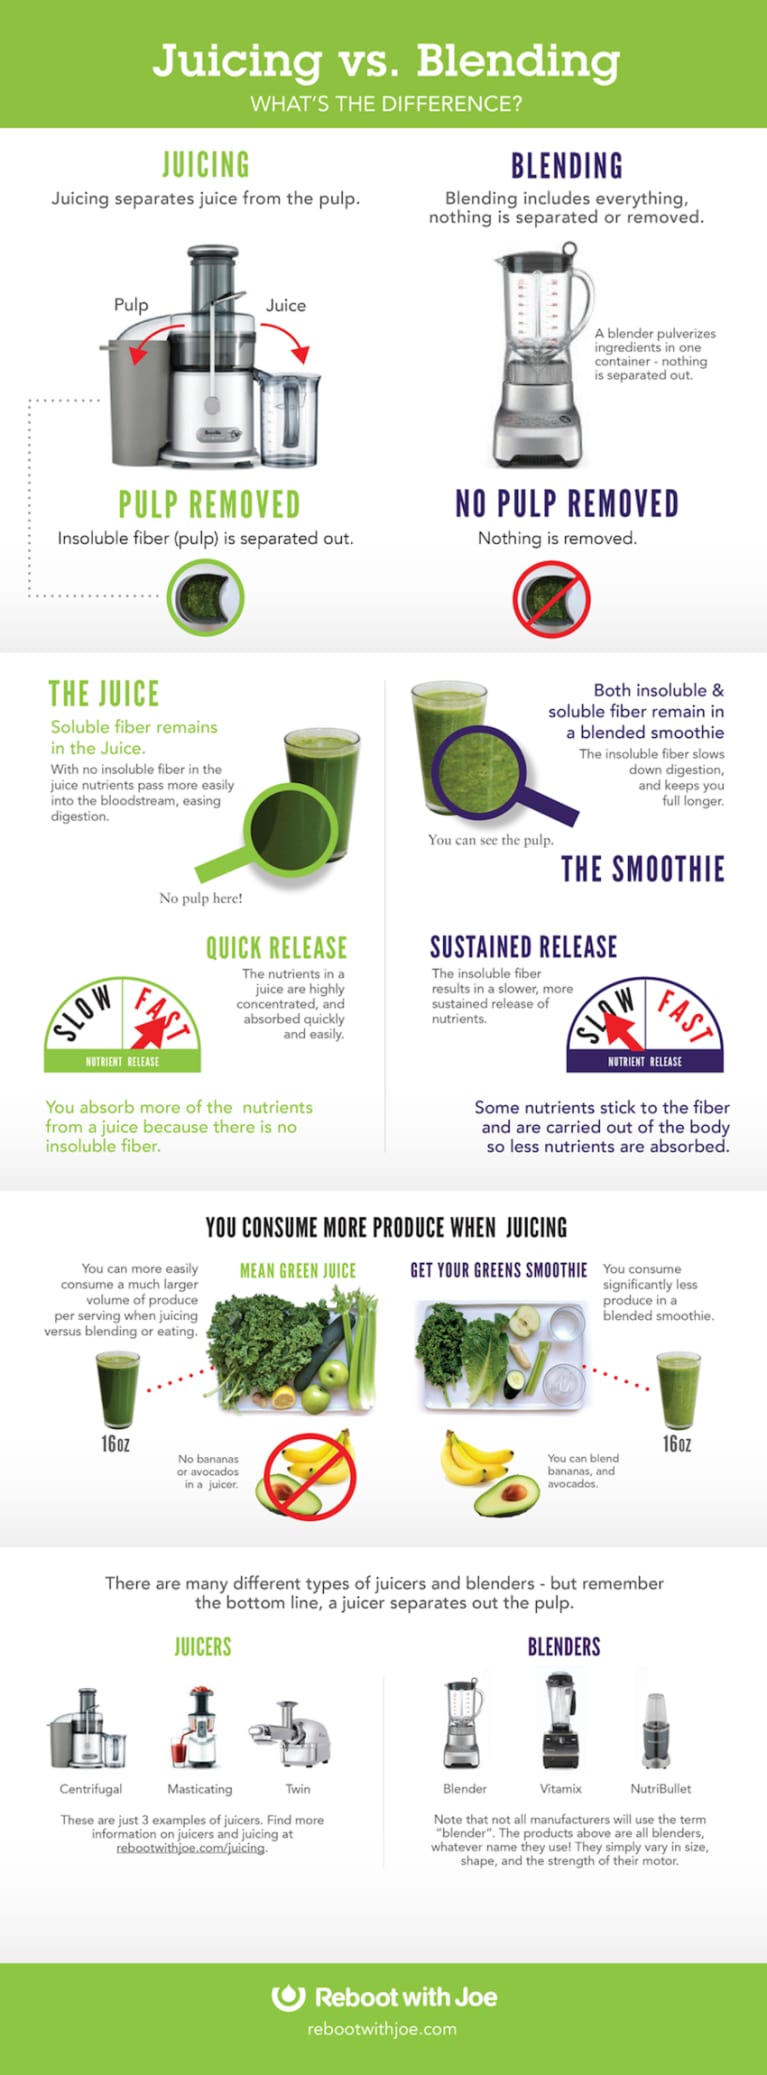 Everything You Need To Know About Juicing Vs. Blending (Infographic)